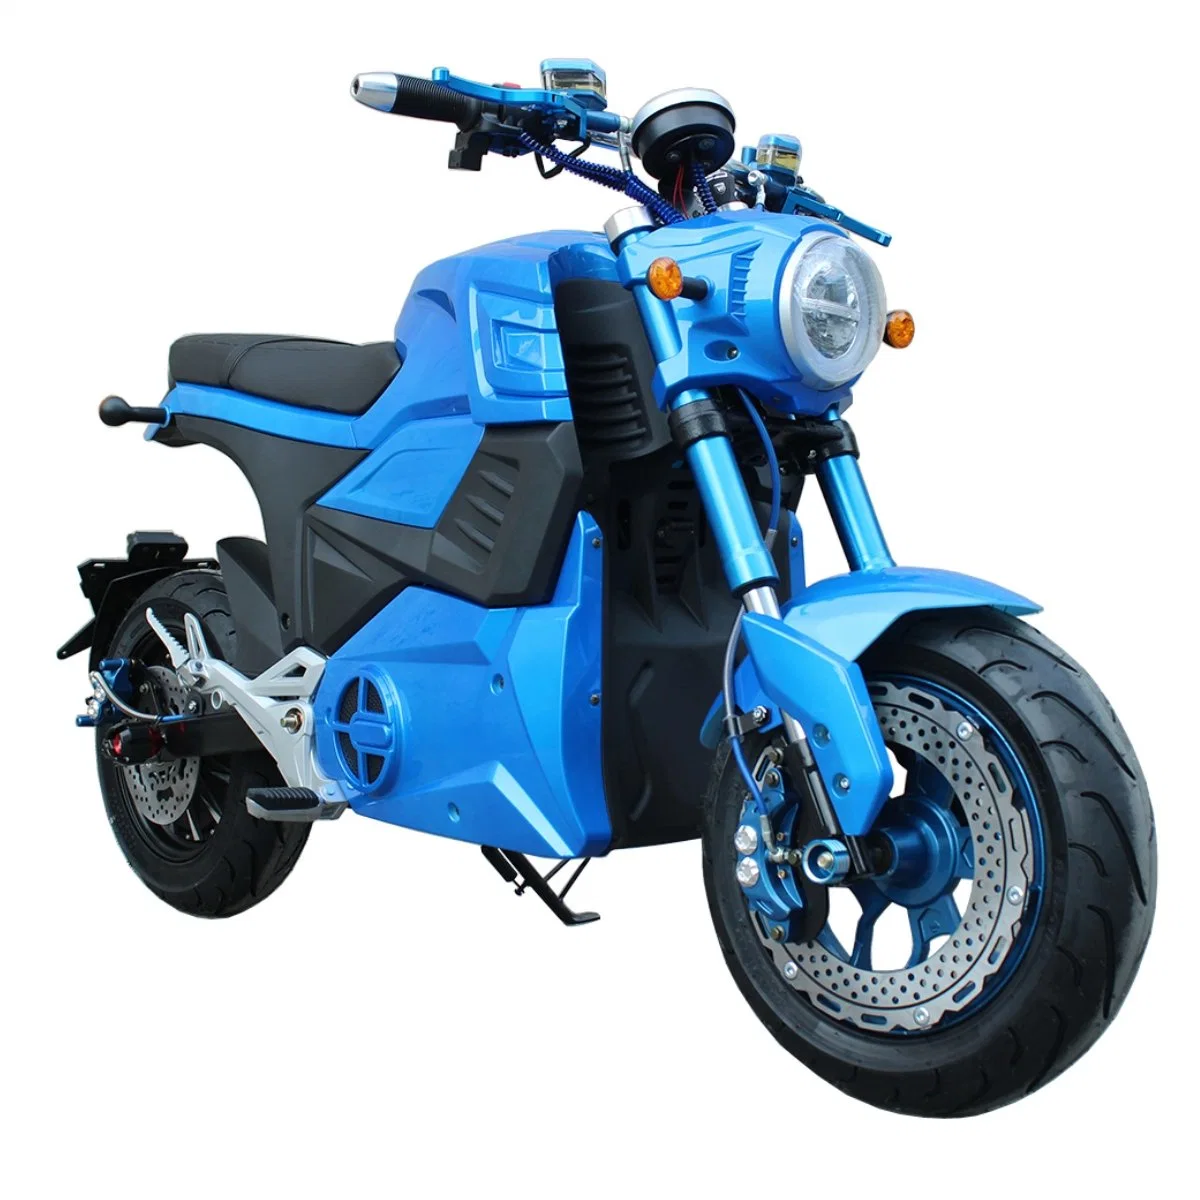 Em-M6, Electric Motorcycle, Electric Vehicle, E Motor, E Motorcycle